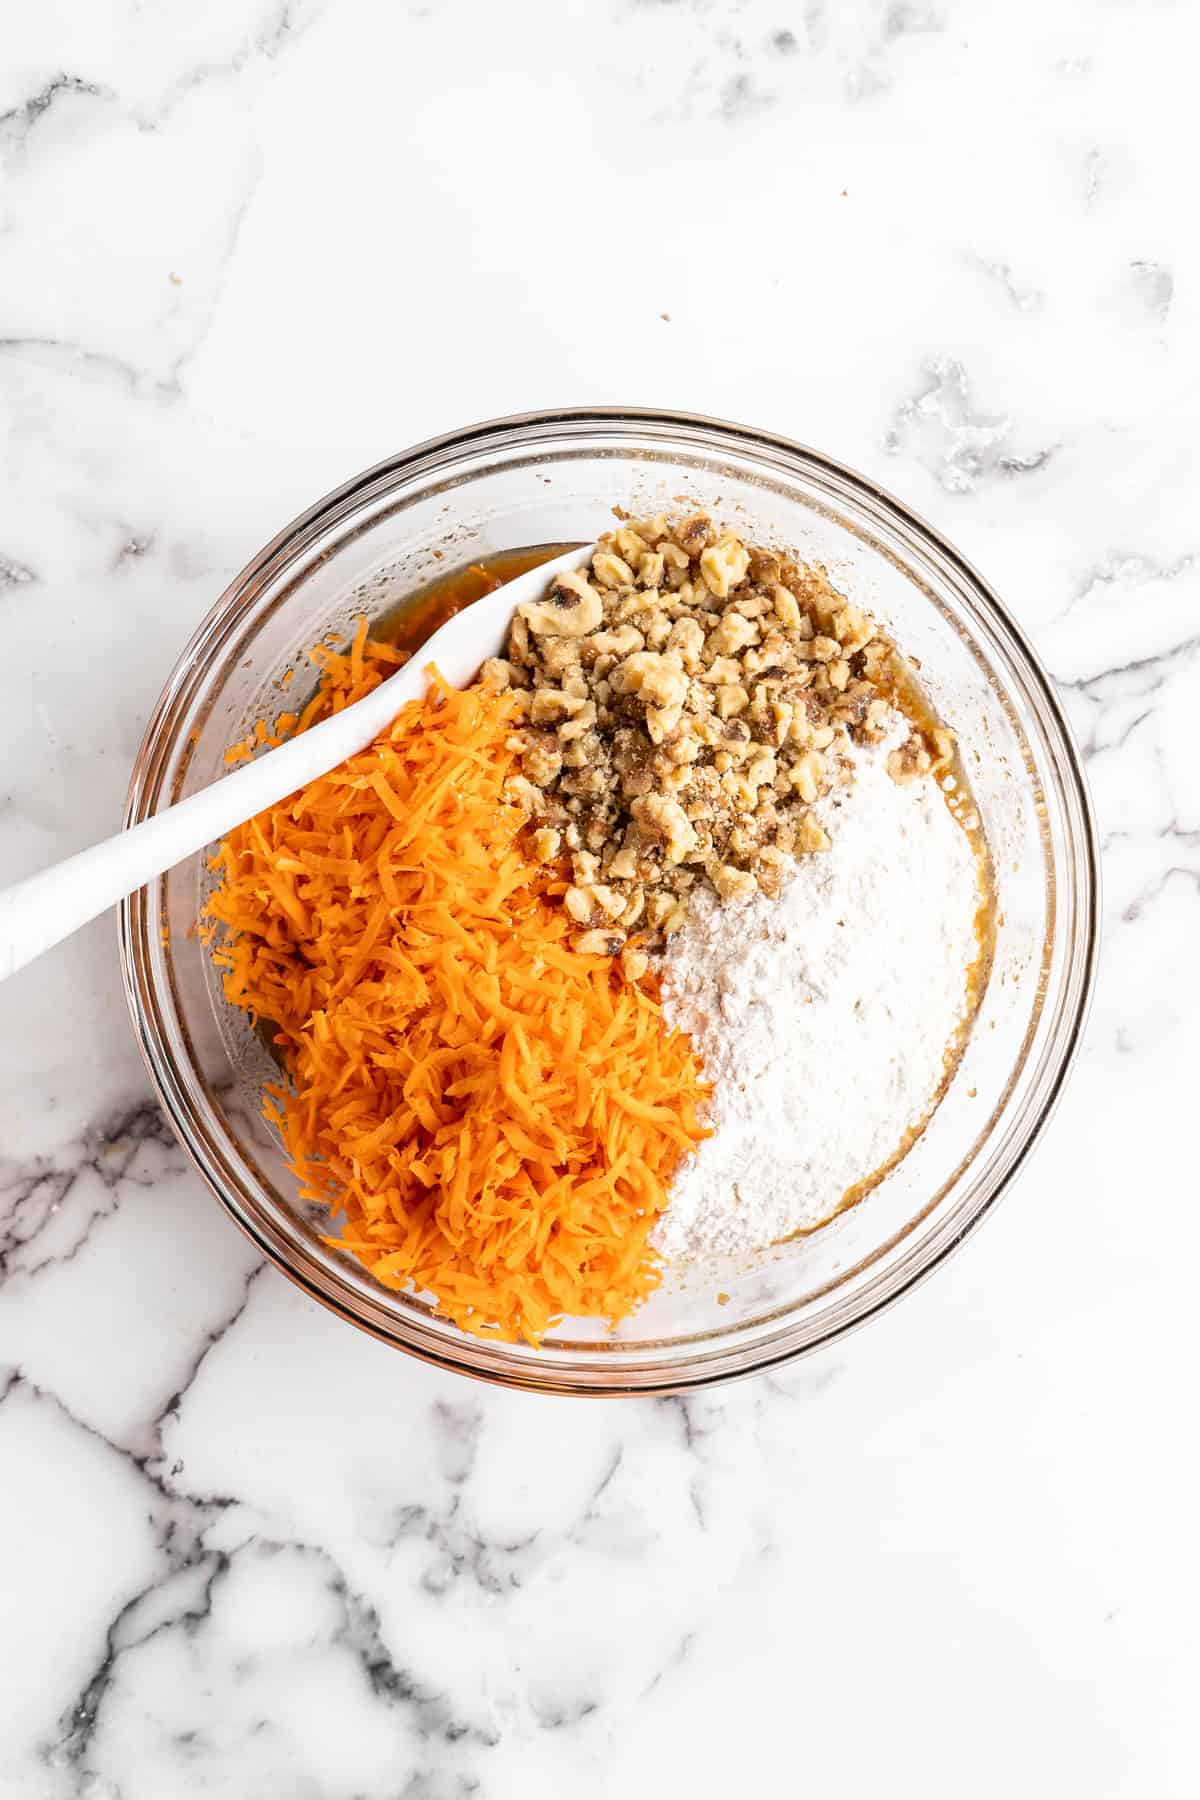 Overhead view of vegan carrot cake ingredients in glass mixing bowl